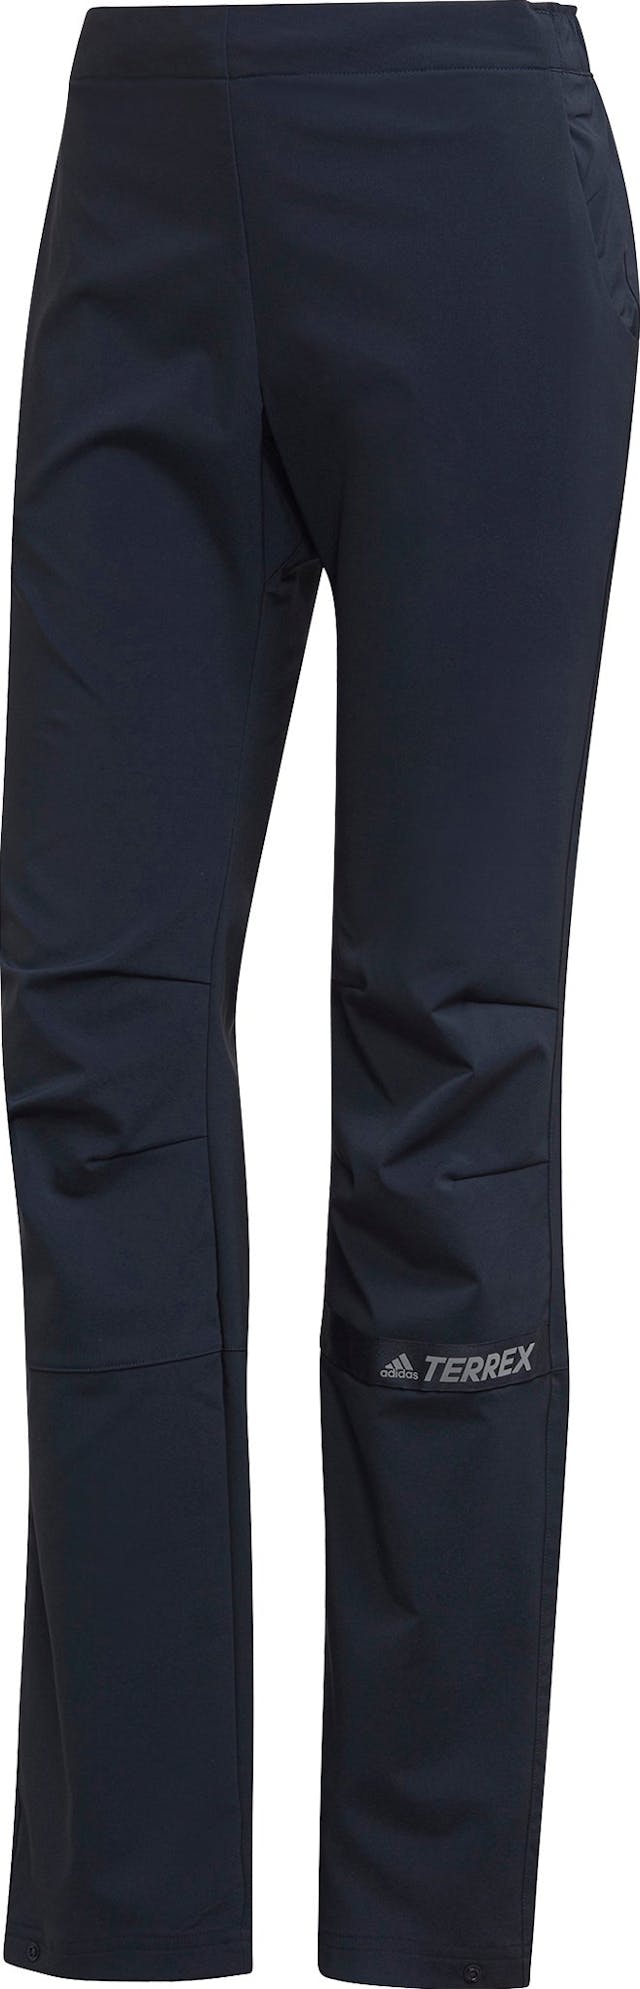 Product image for Terrex Multi Woven Pant - Women's